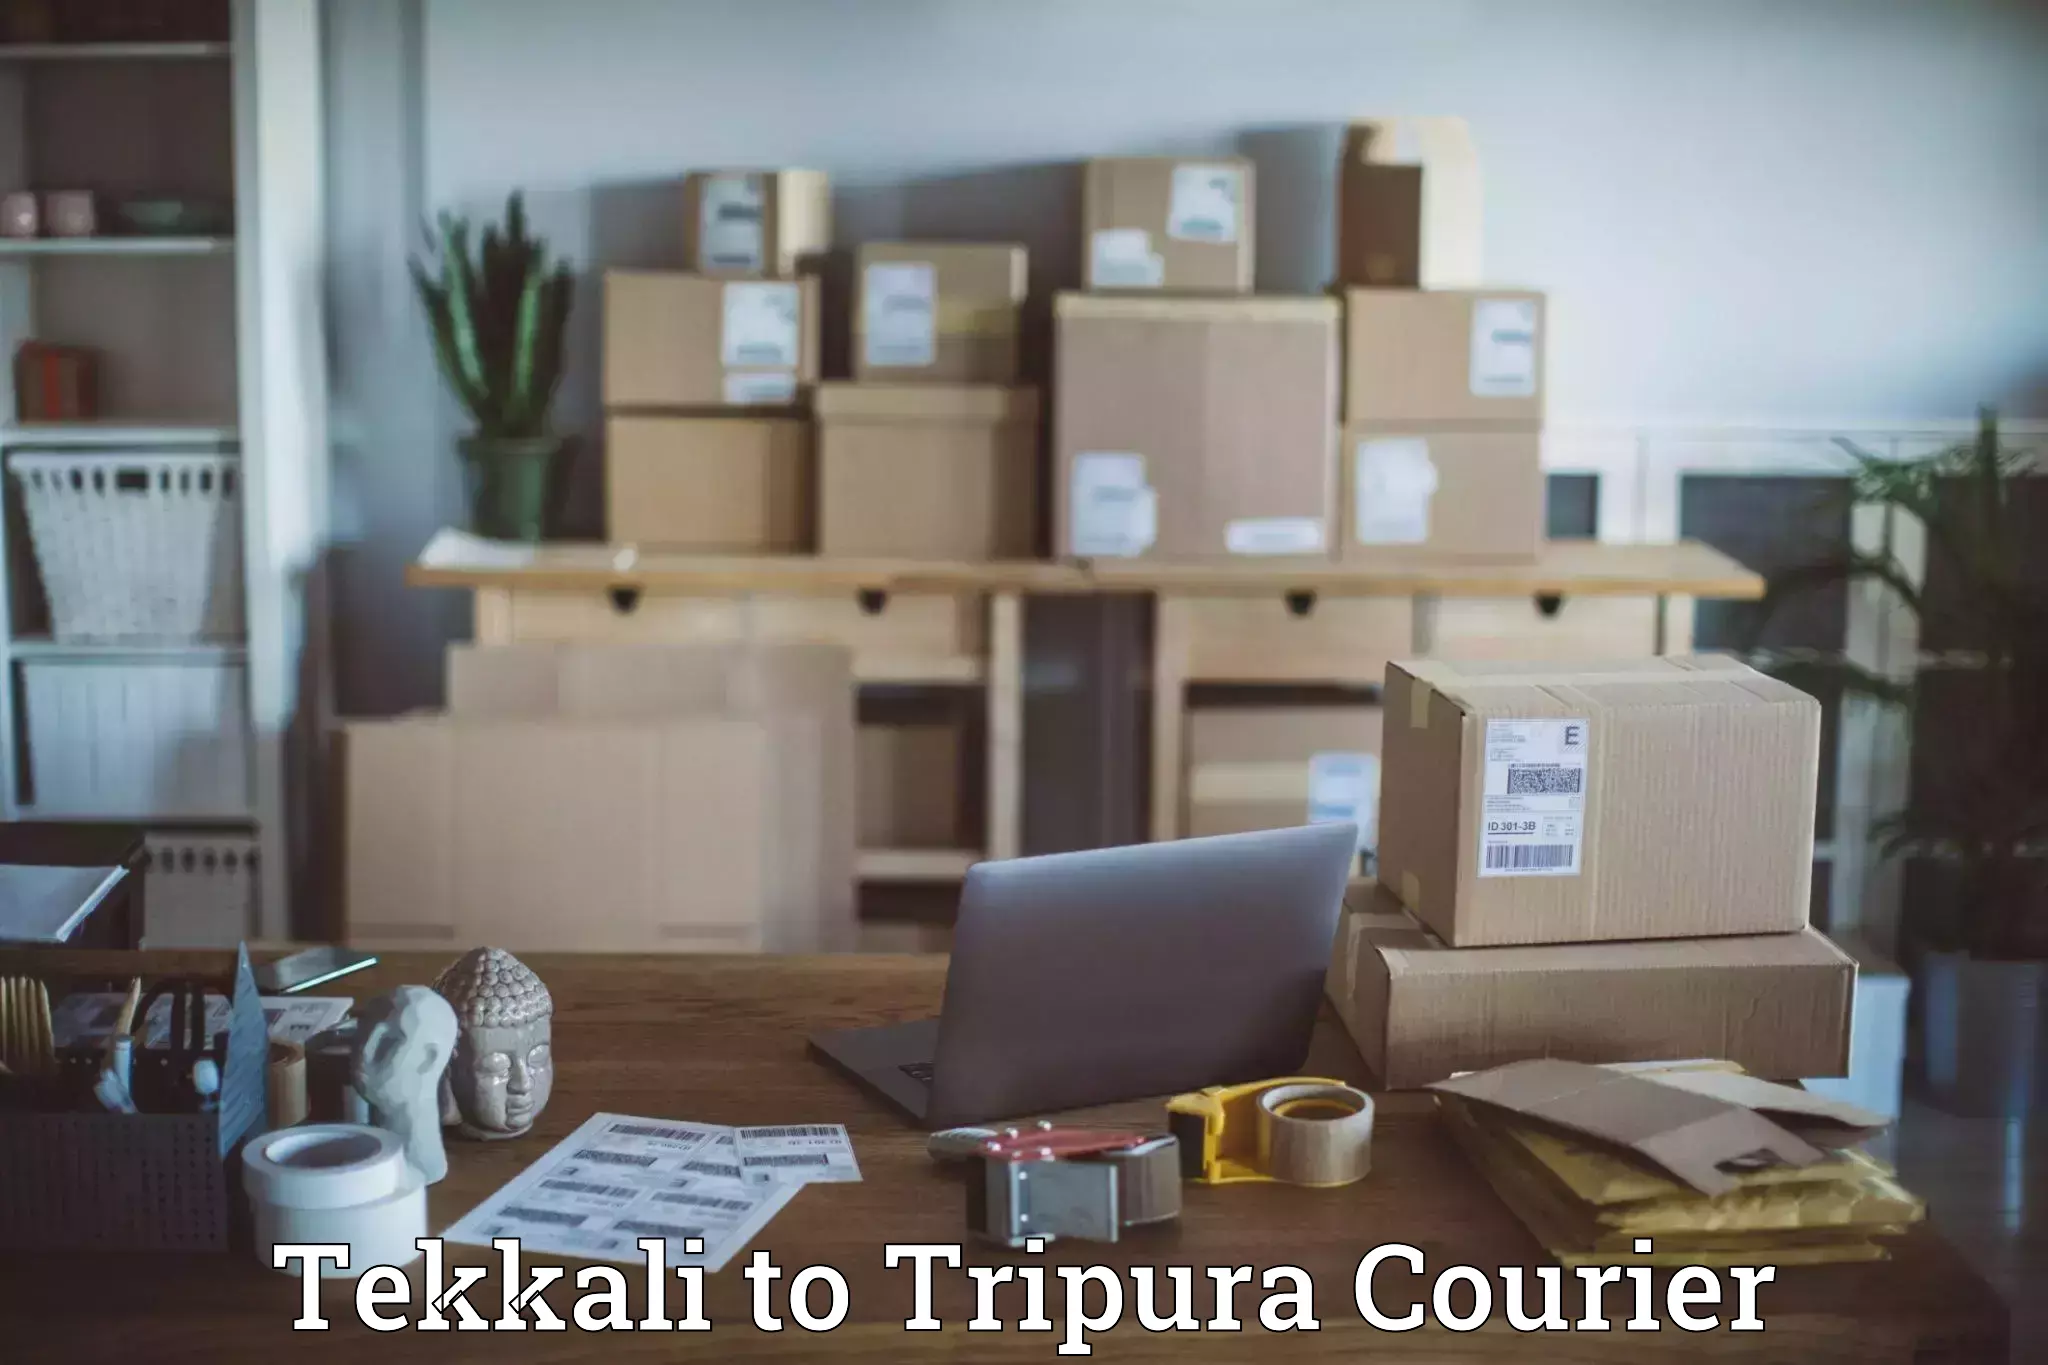 Large package courier Tekkali to Udaipur Tripura